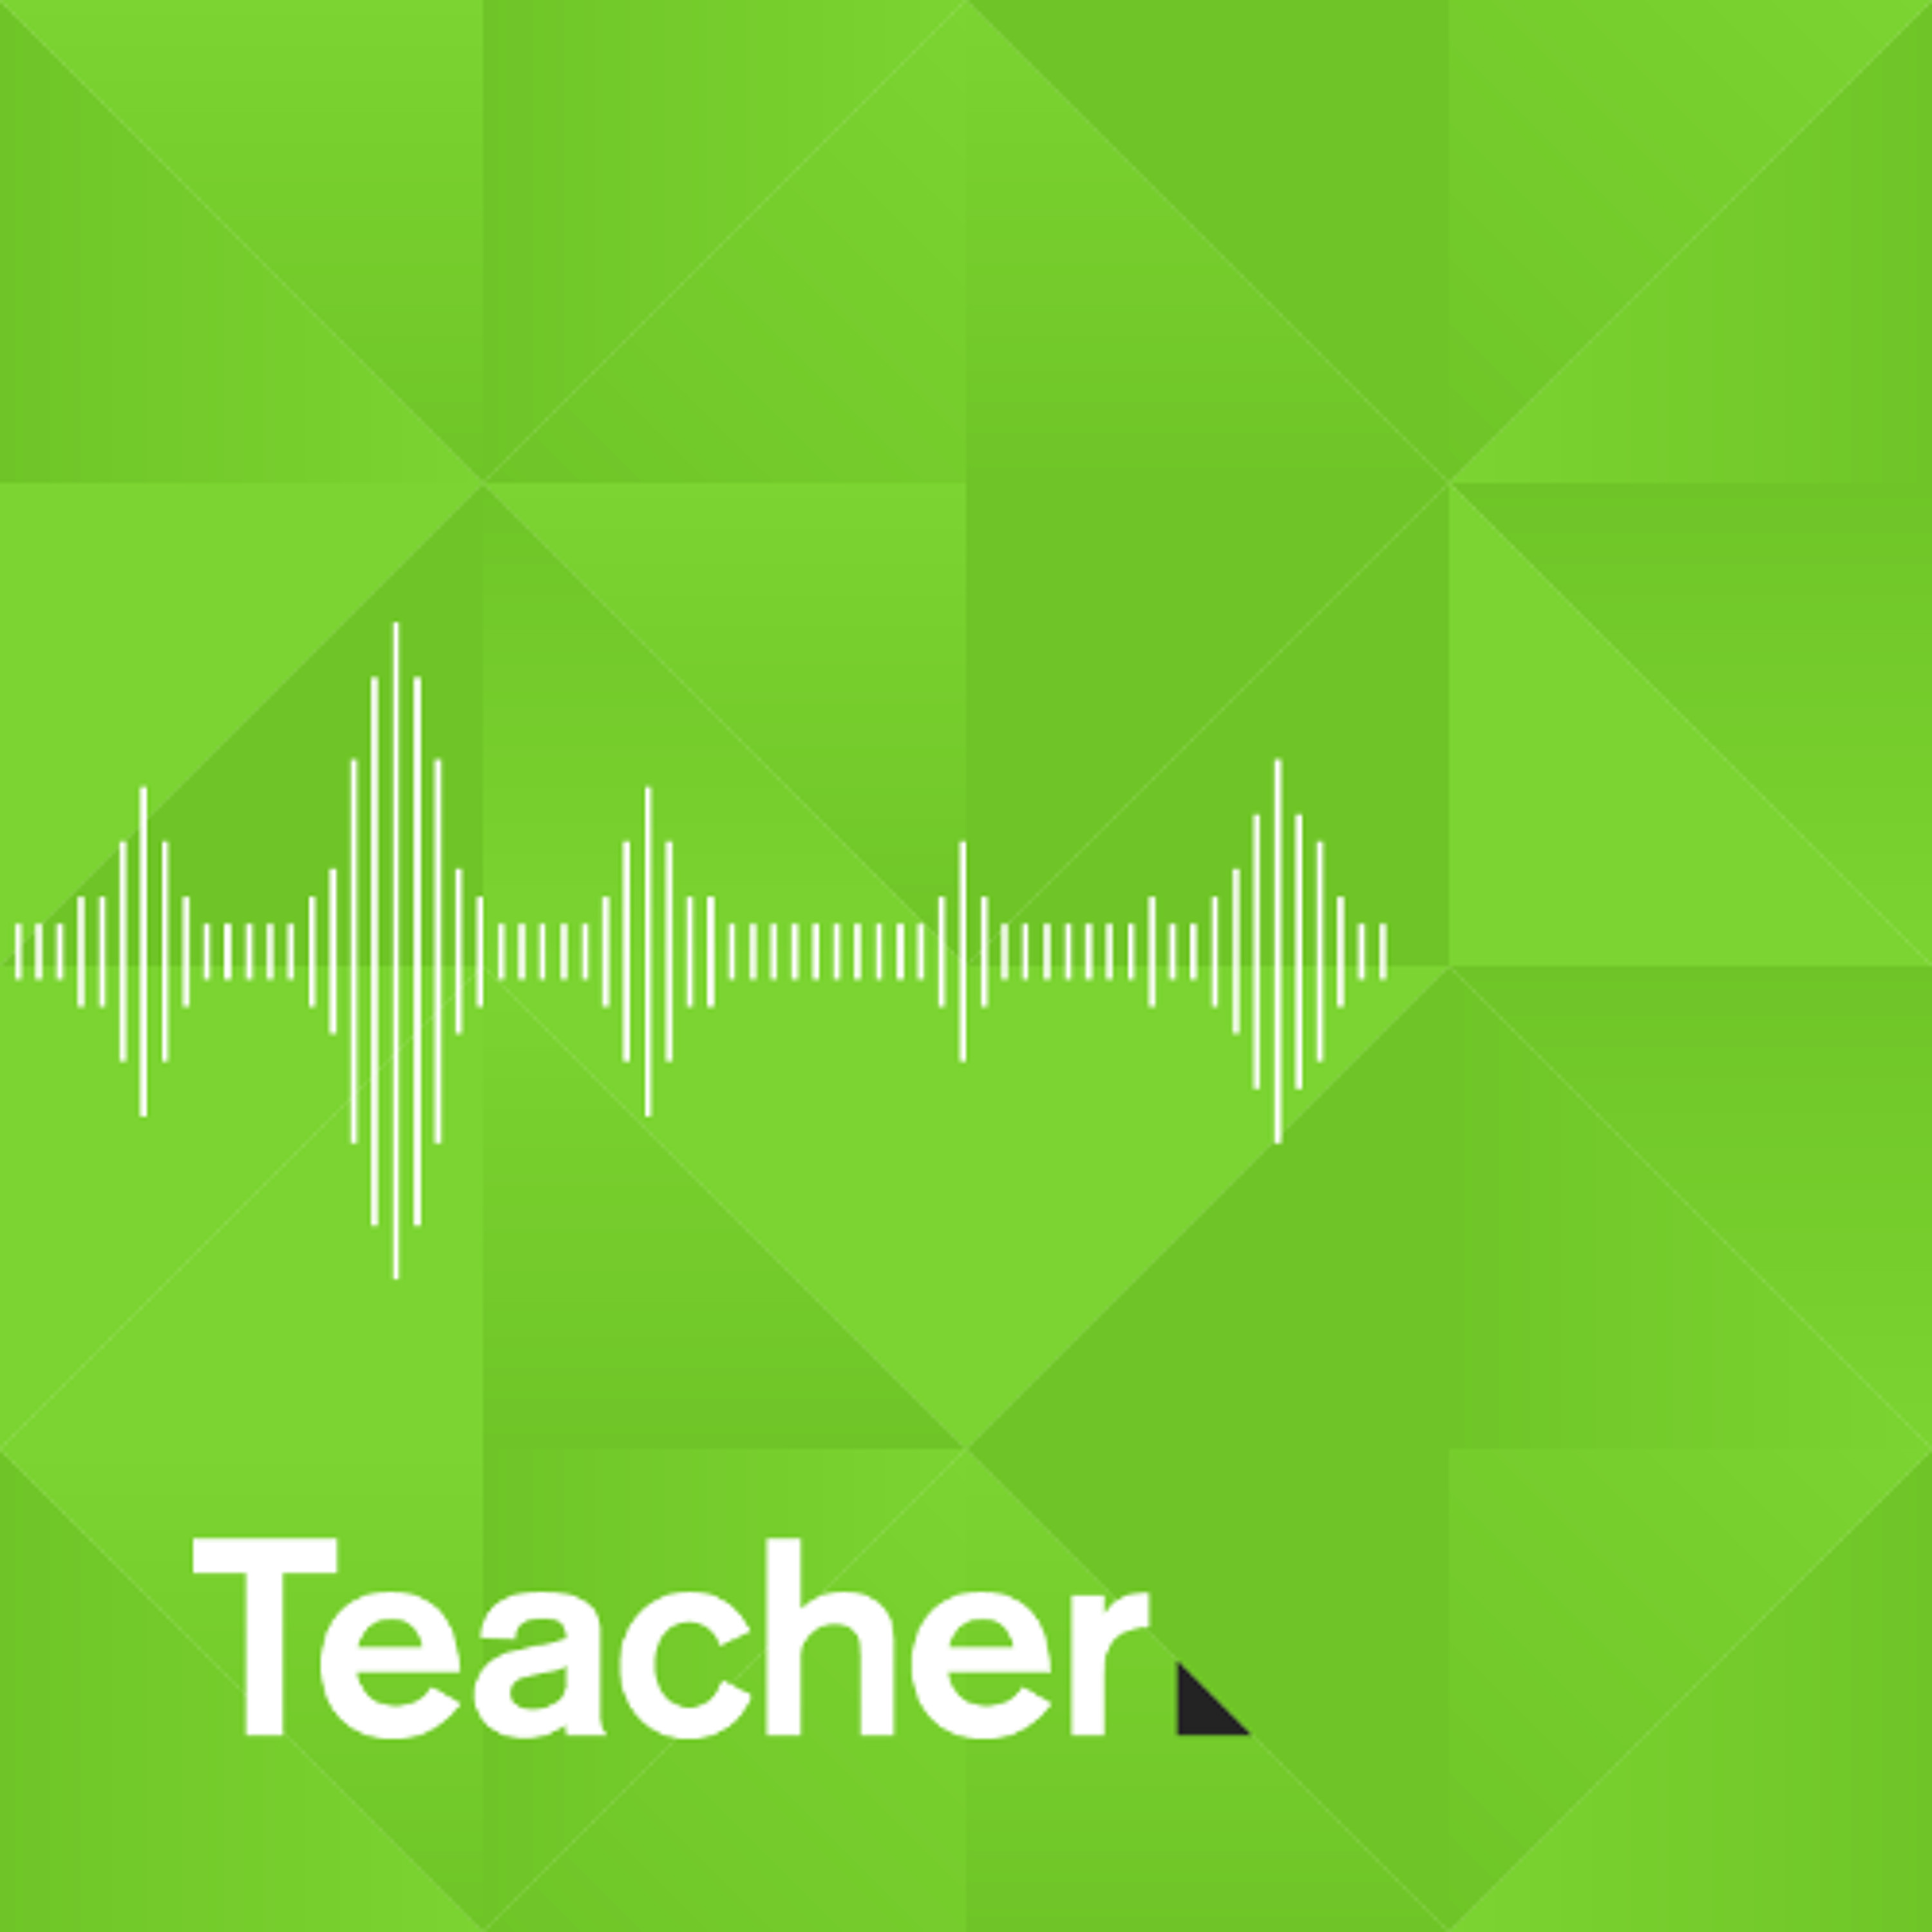 Podcast special: World-class learning systems – conditions for successful student learning